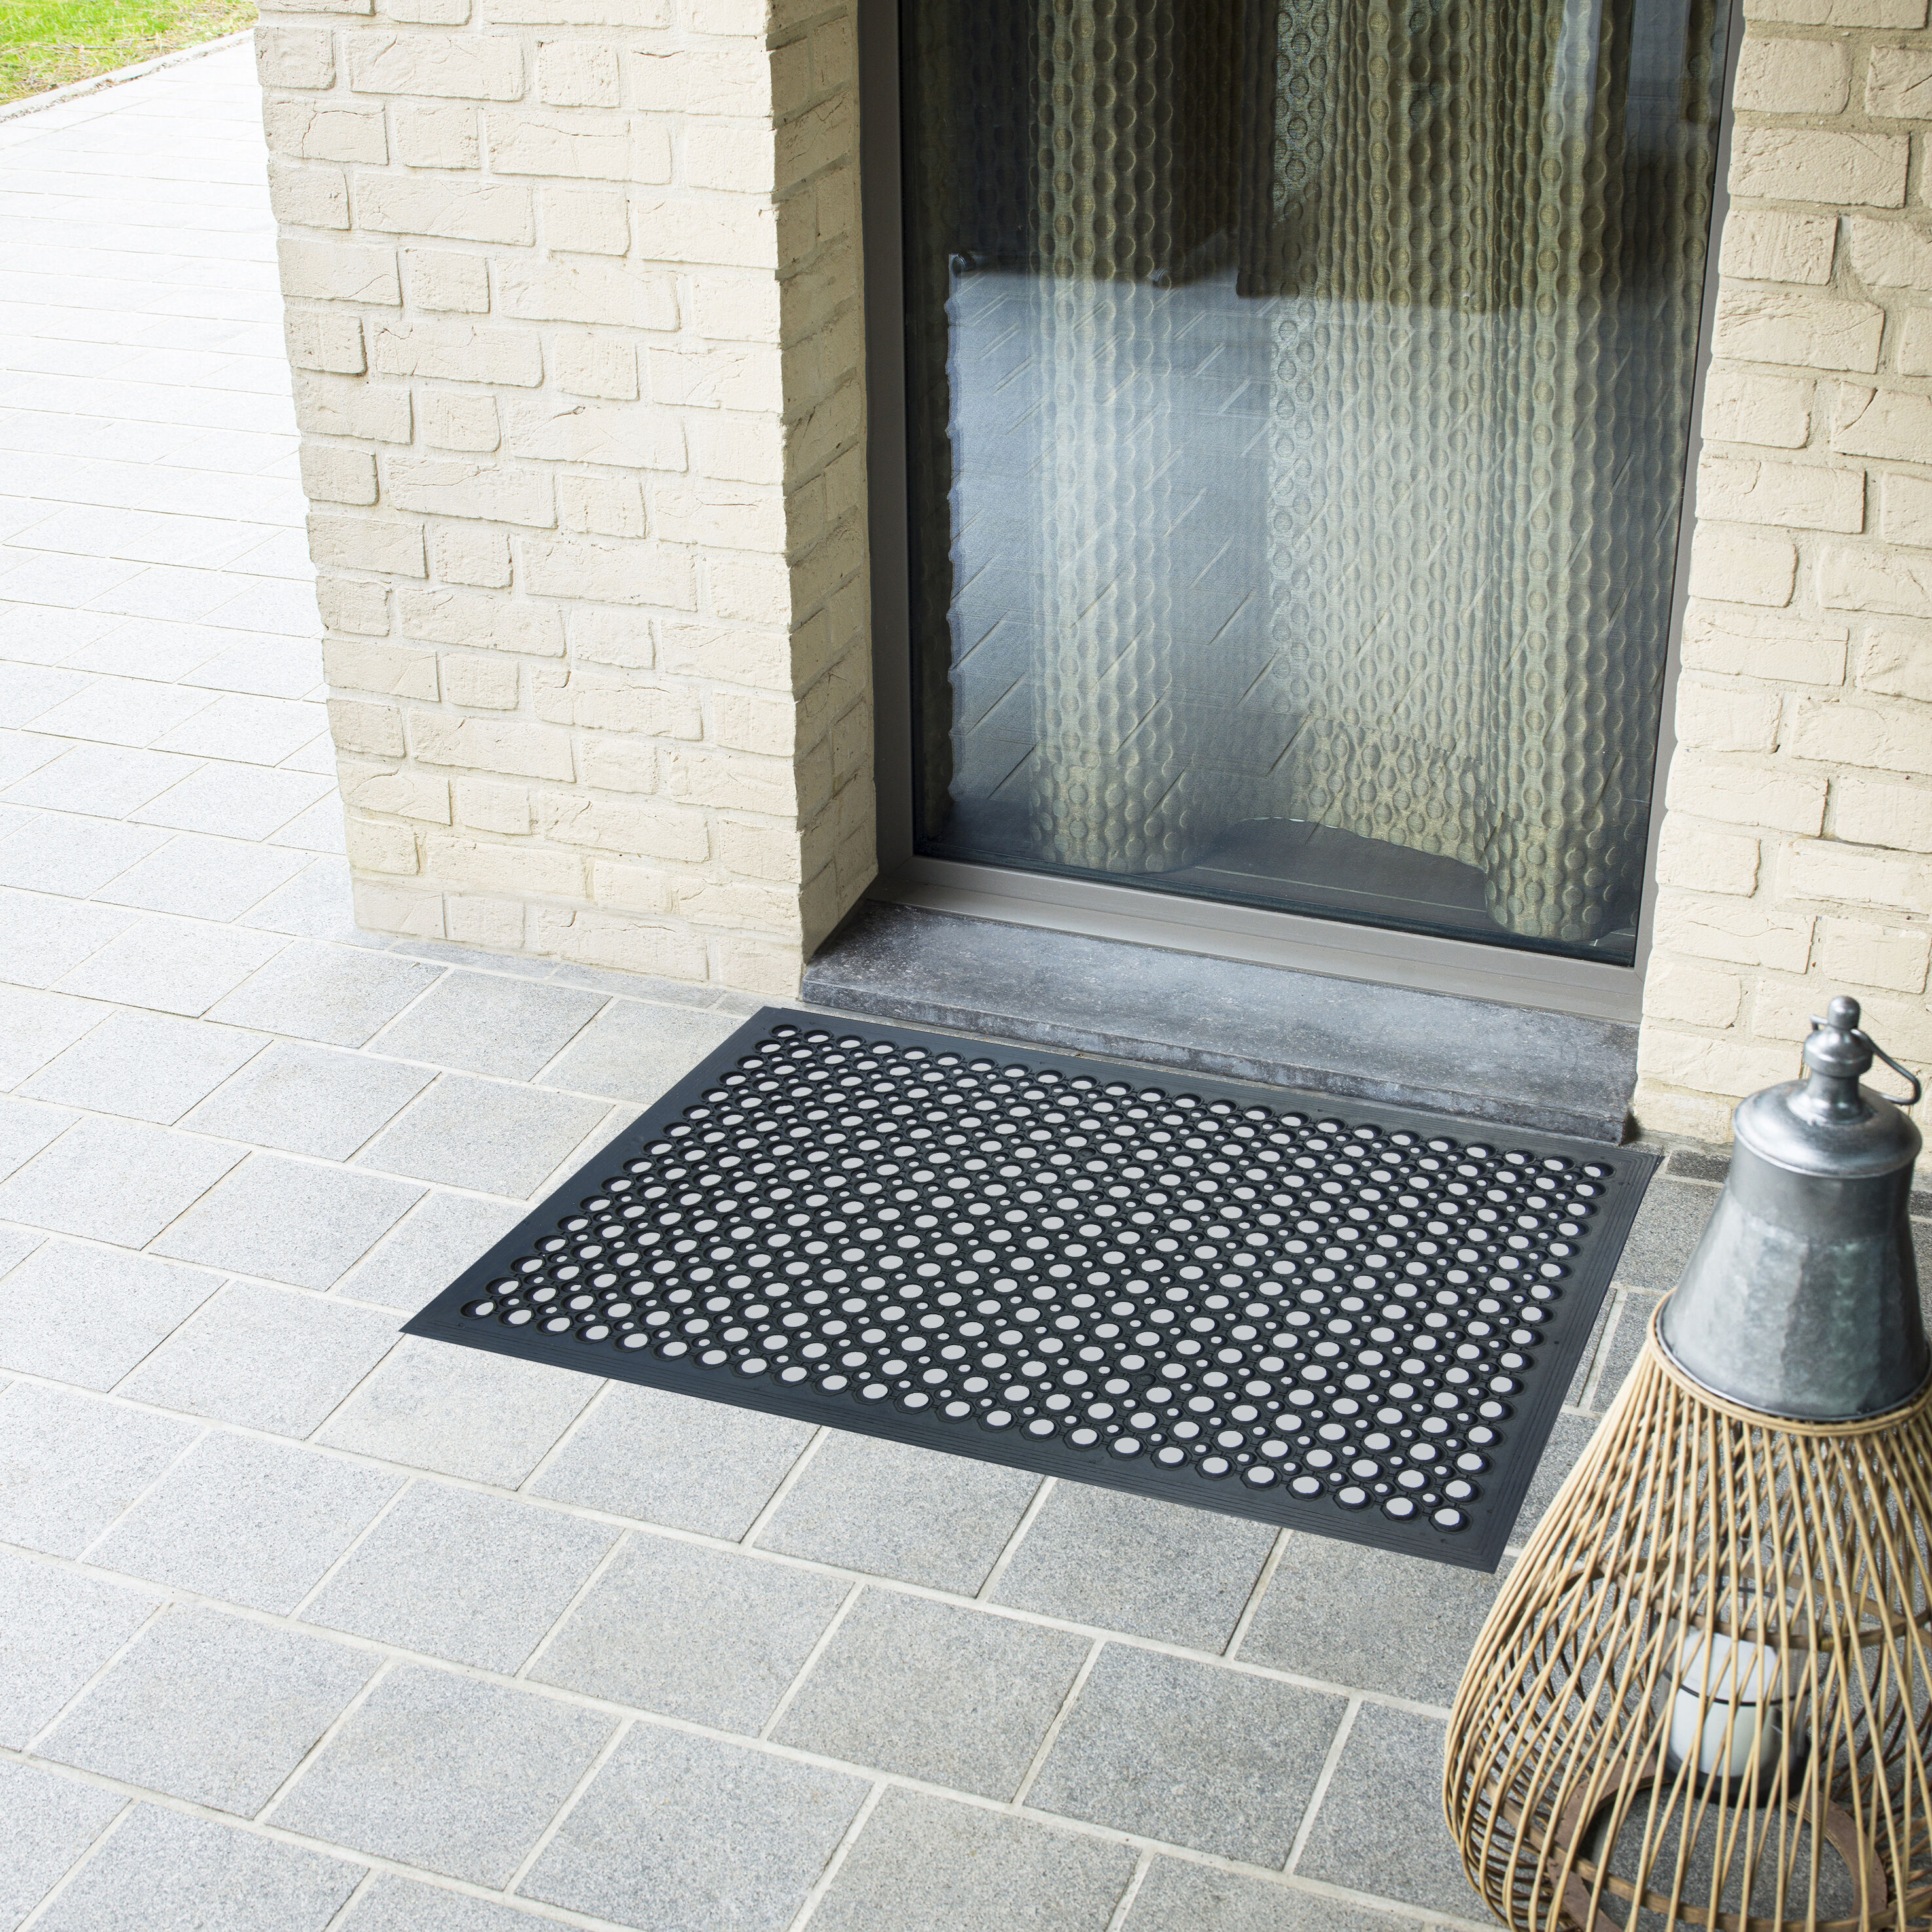 Project Source 4-ft x 6-ft Gray/Silver Rectangular Outdoor Decorative  Utility Mat at